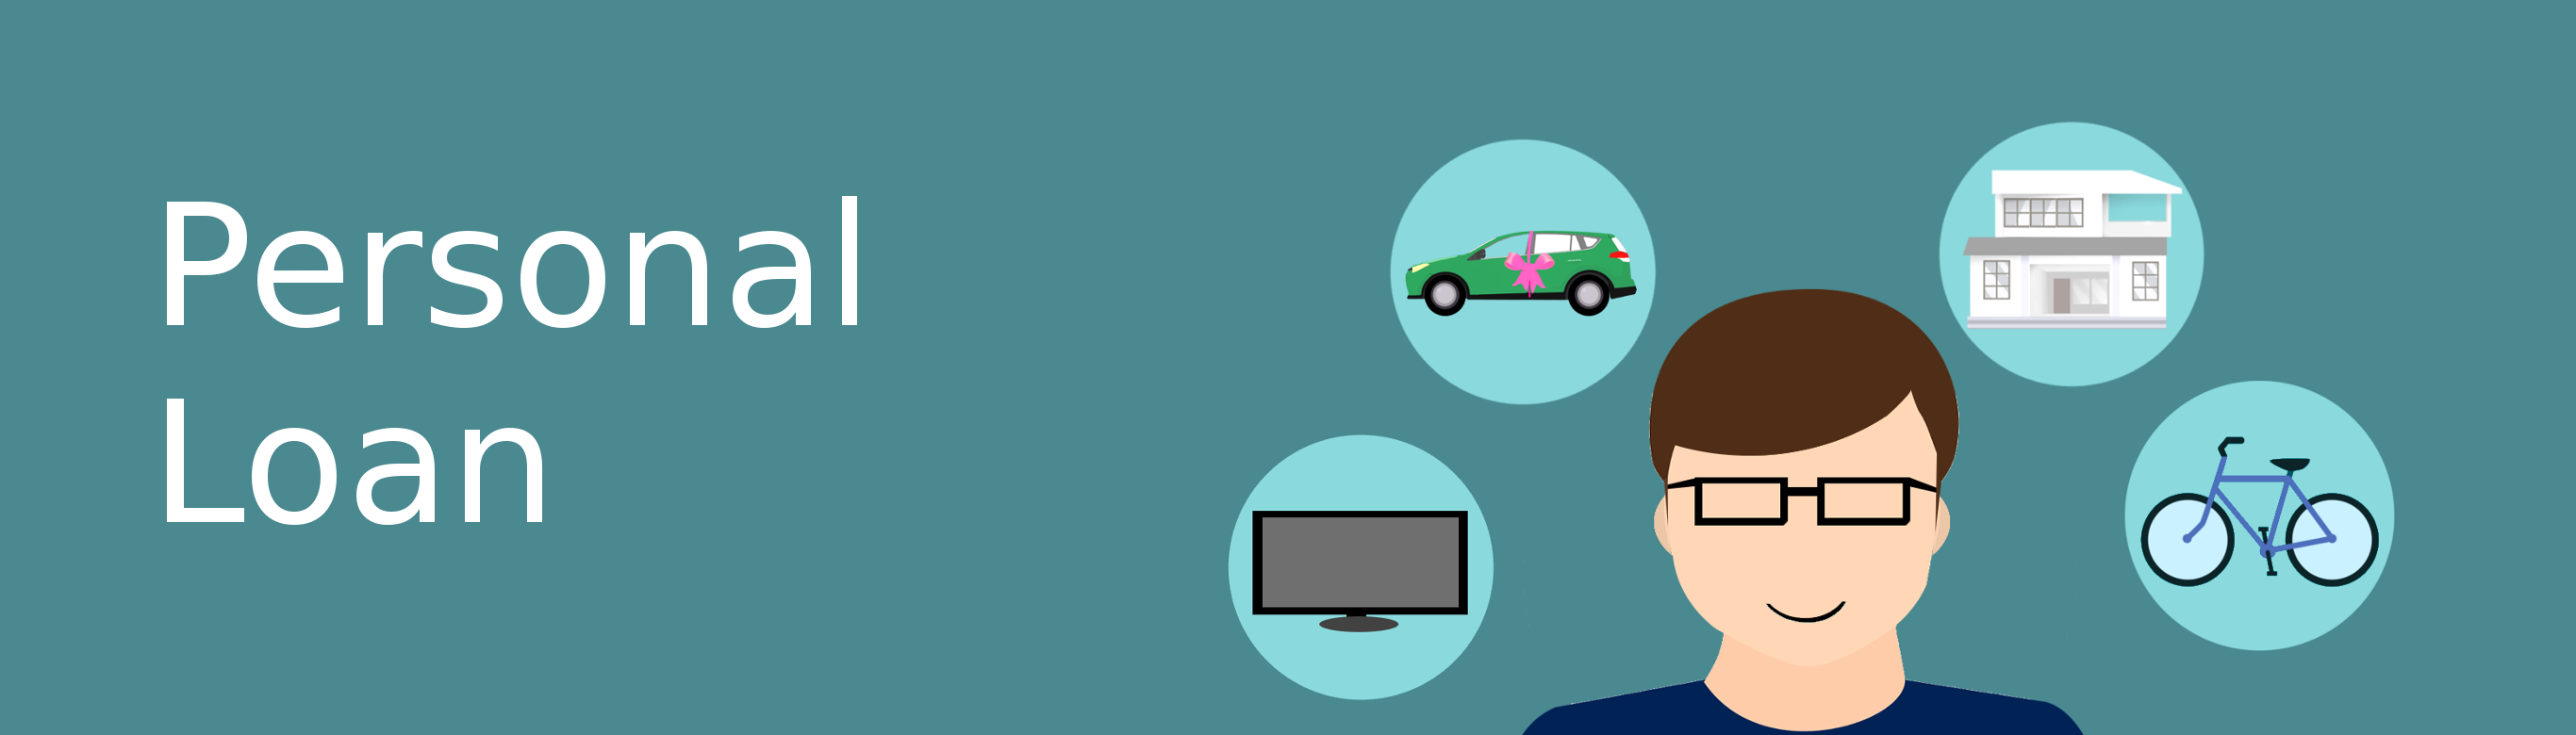 Ilustratin of a bicycle, car, house, computer monitor and man in glasses depisctimg multiuse of a personal loan